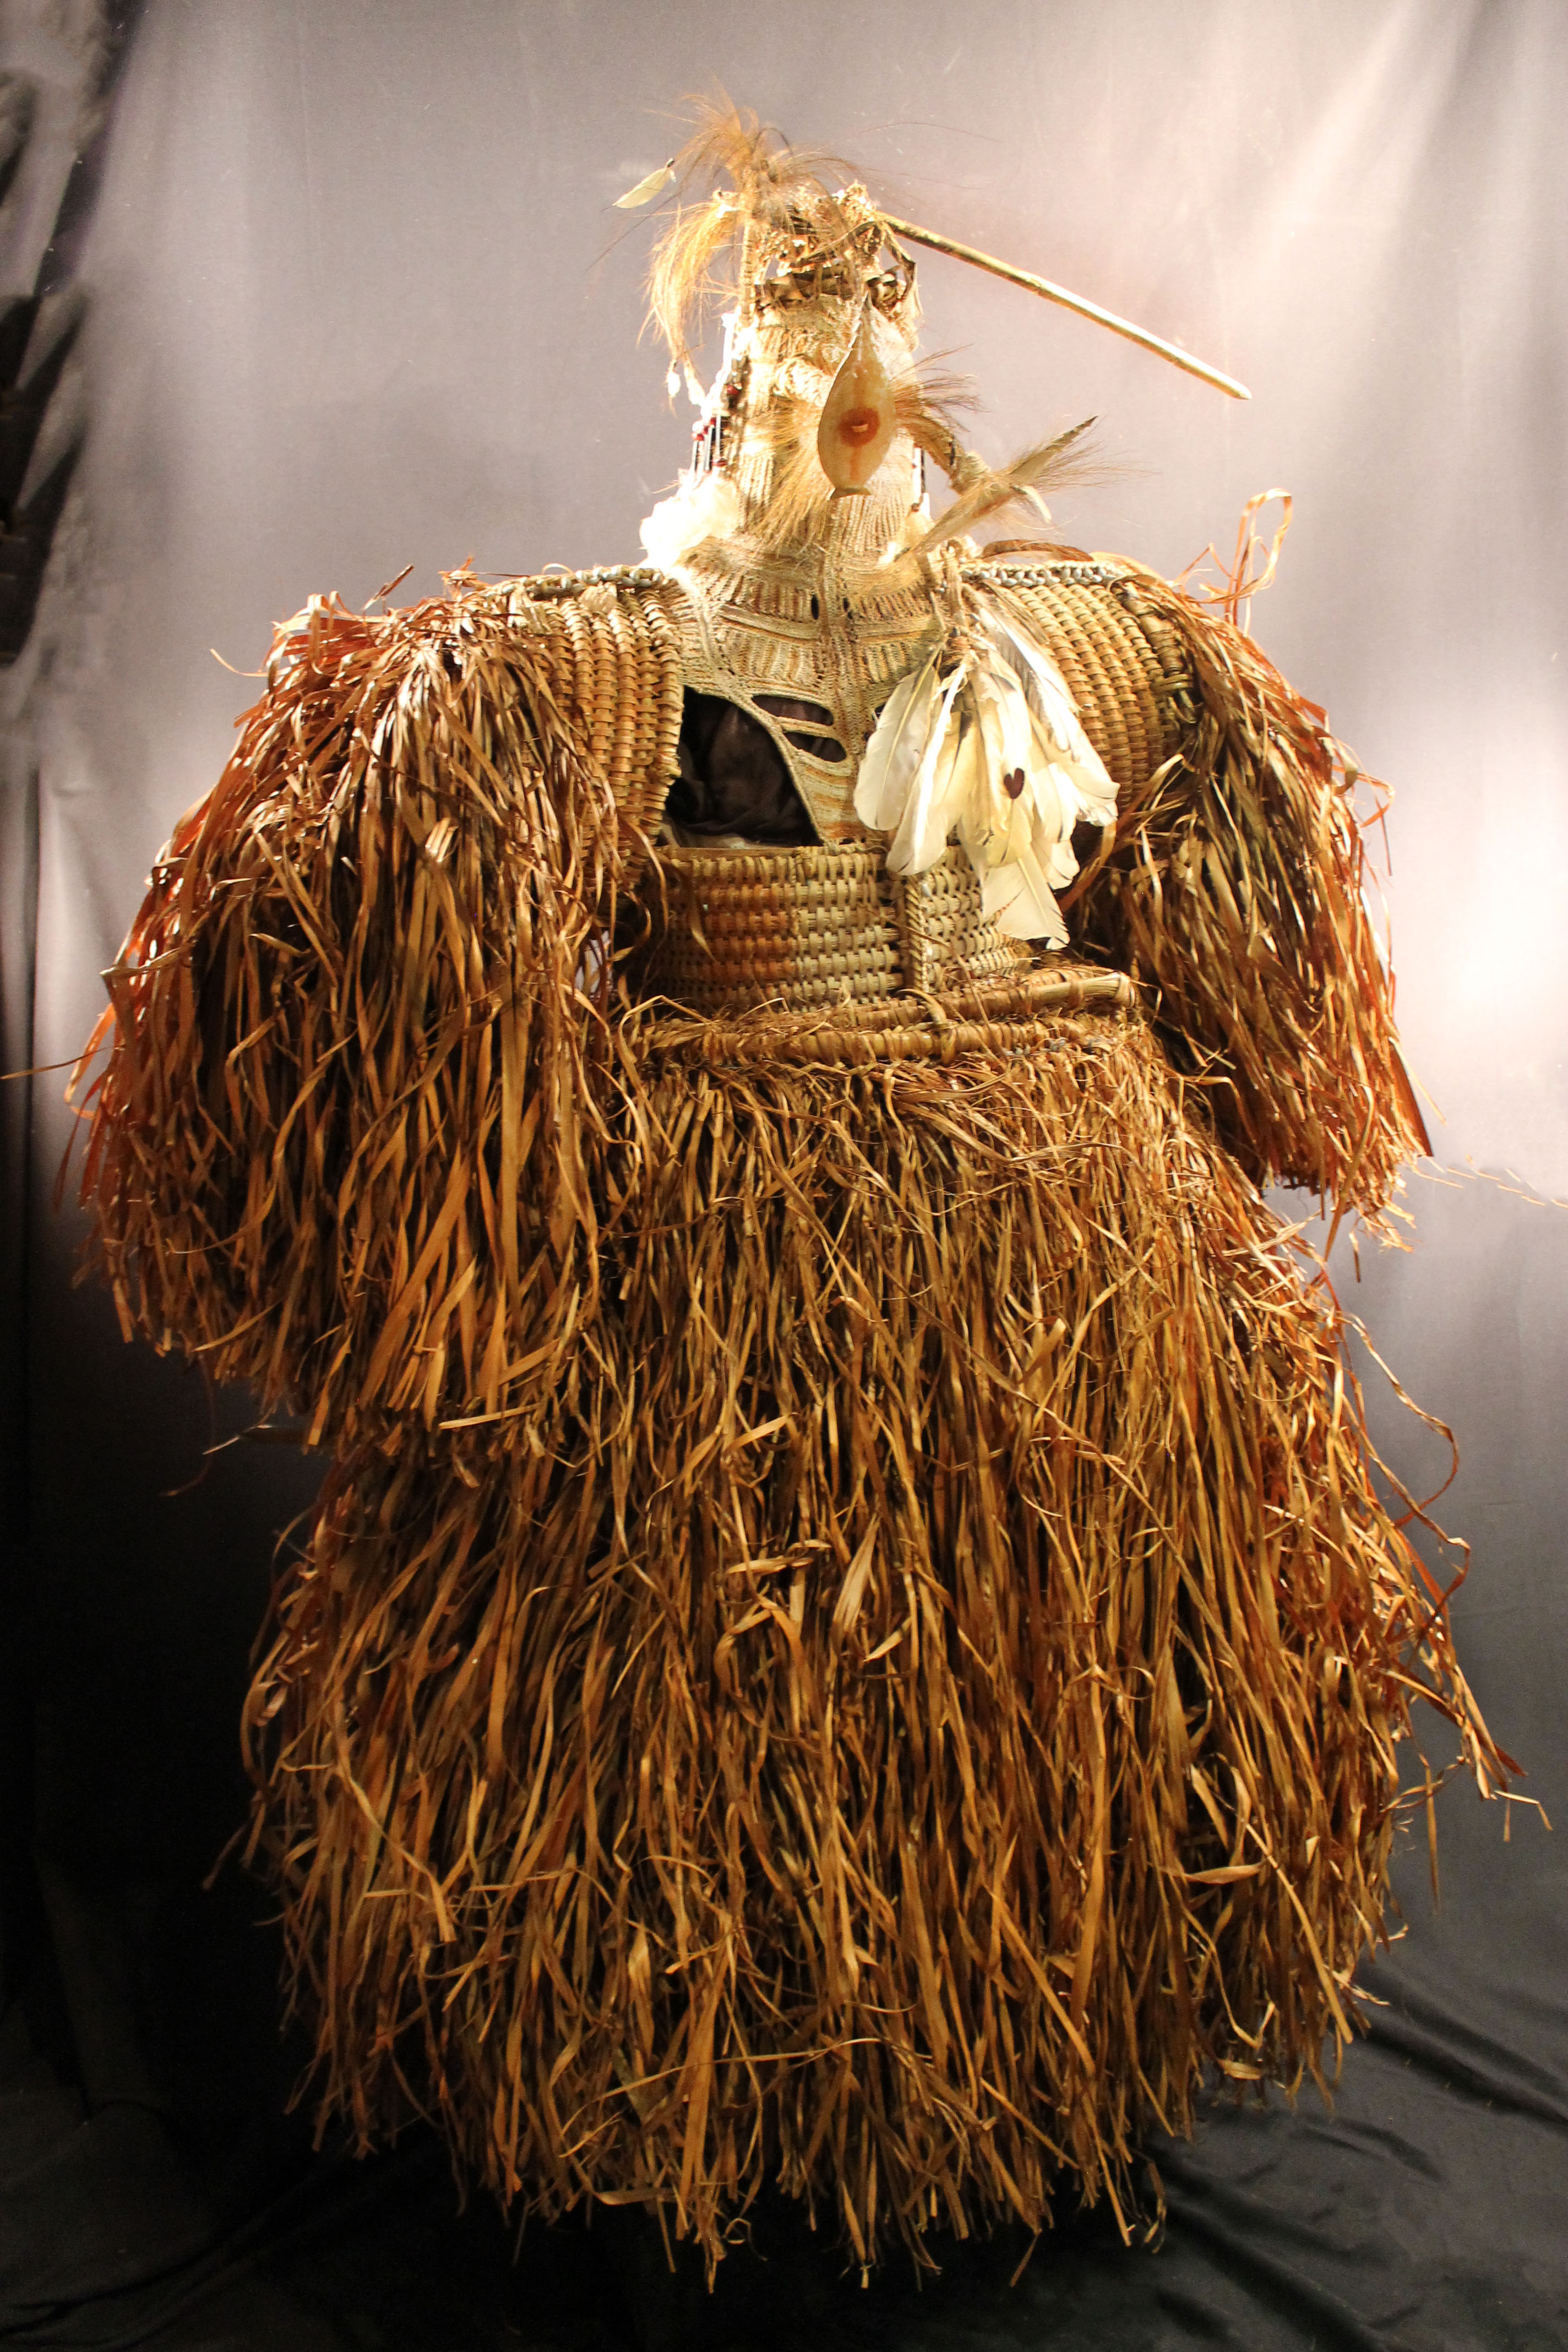 Woven body masks that has a grass skirt and sleeves with striped brown and white design on the center.